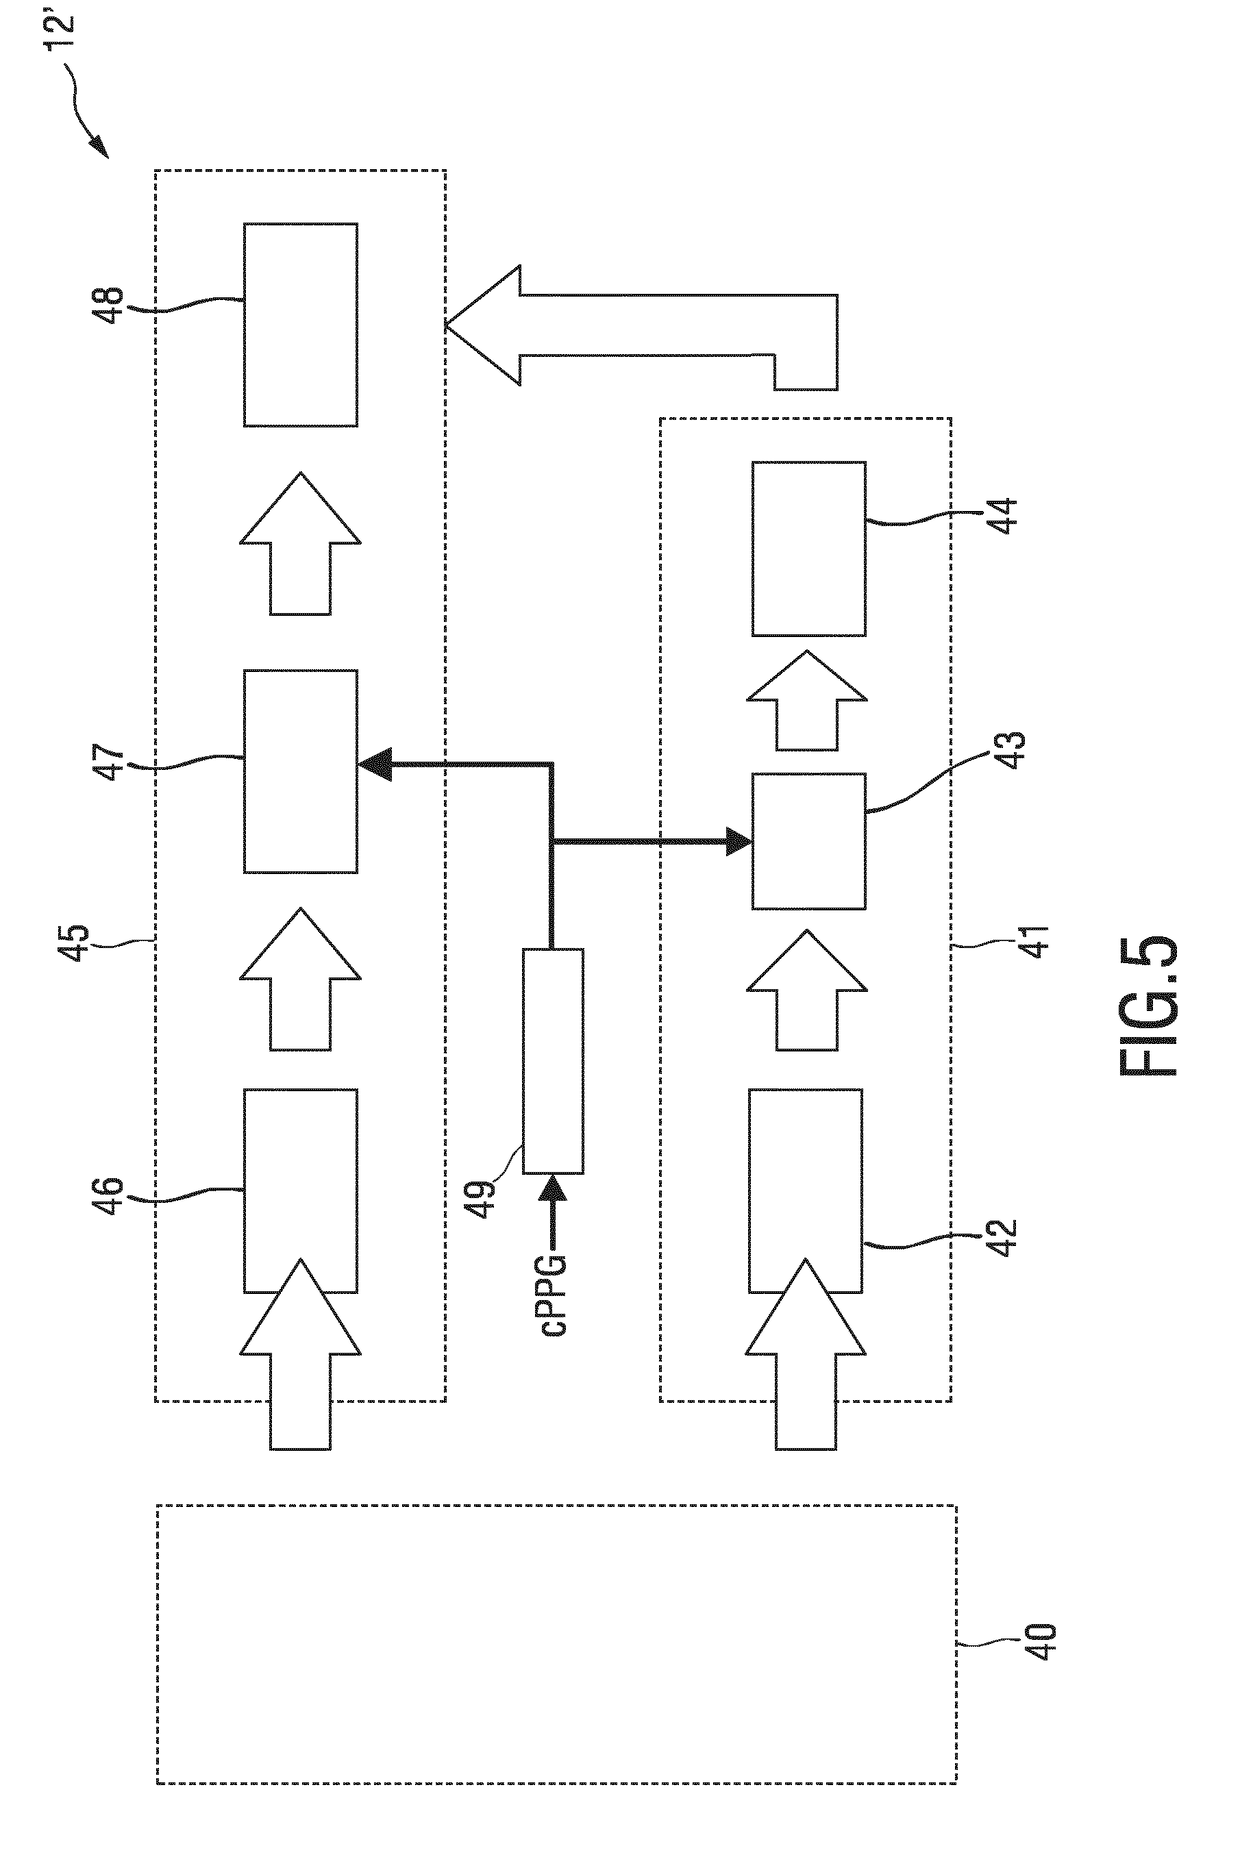 Device, system and method for generating a photoplethysmographic image carrying vital sign information of a subject